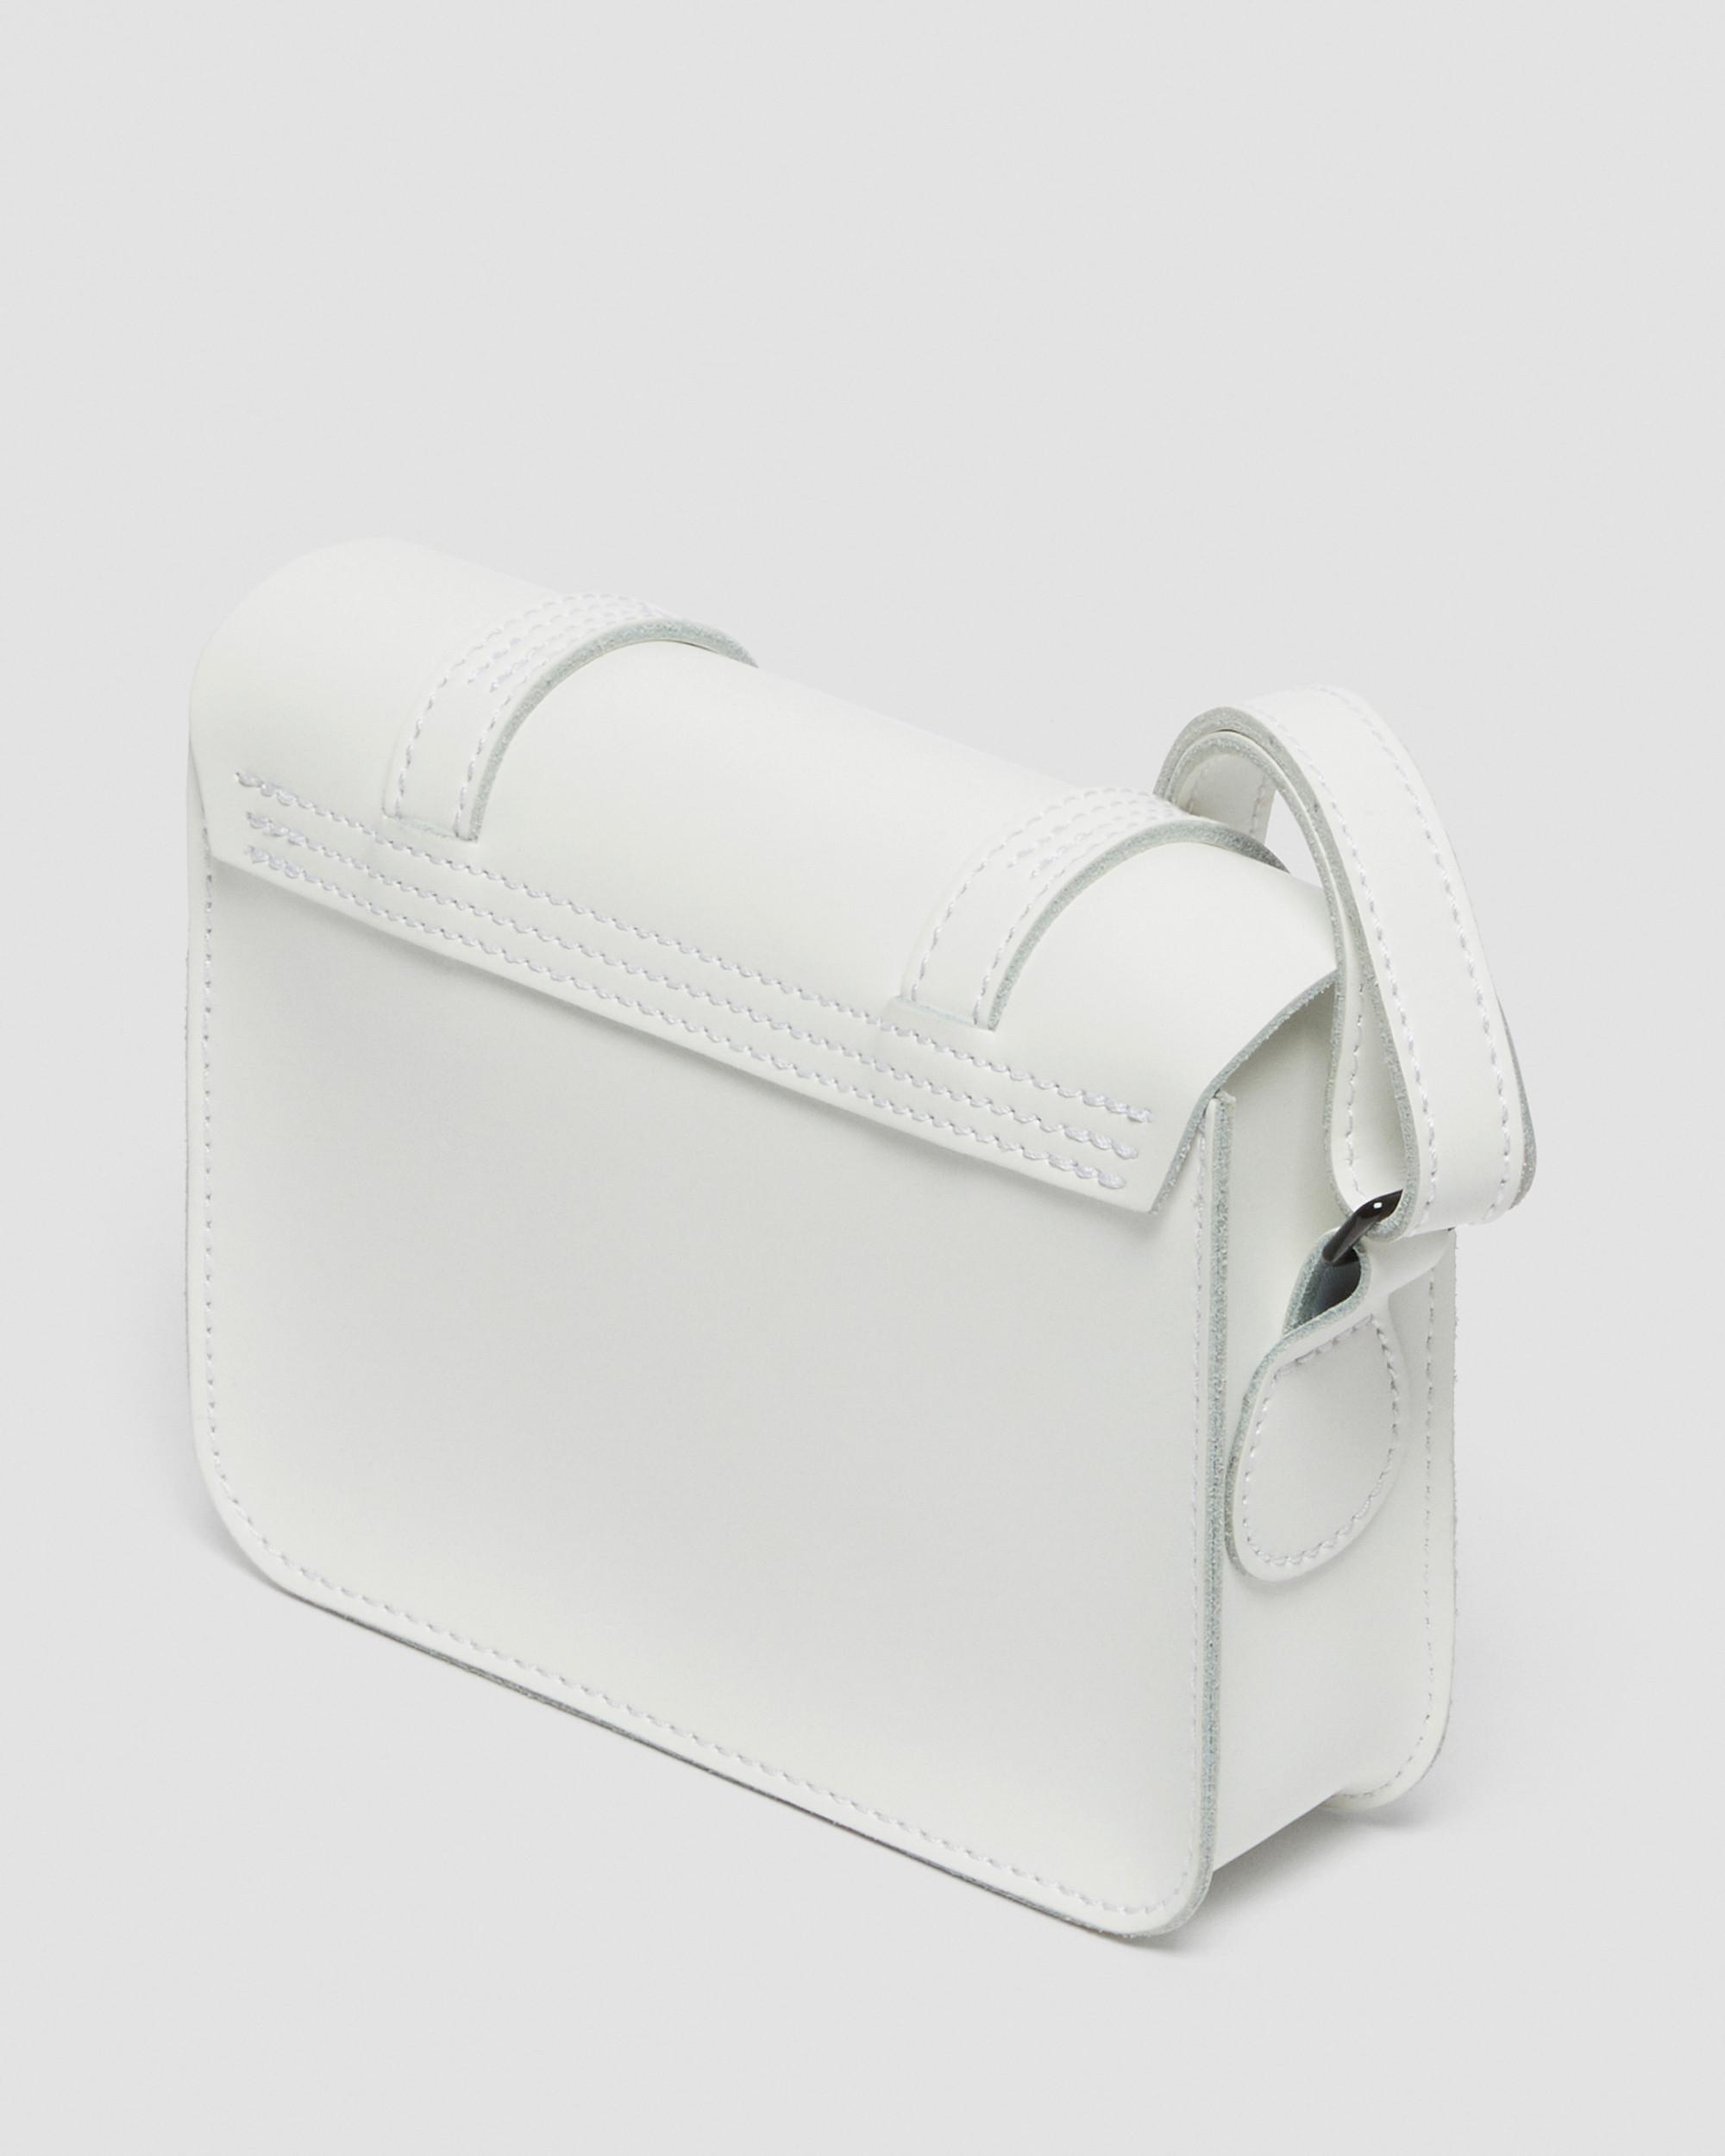 7 Inch Kiev Smooth Leather Crossbody Bag in White